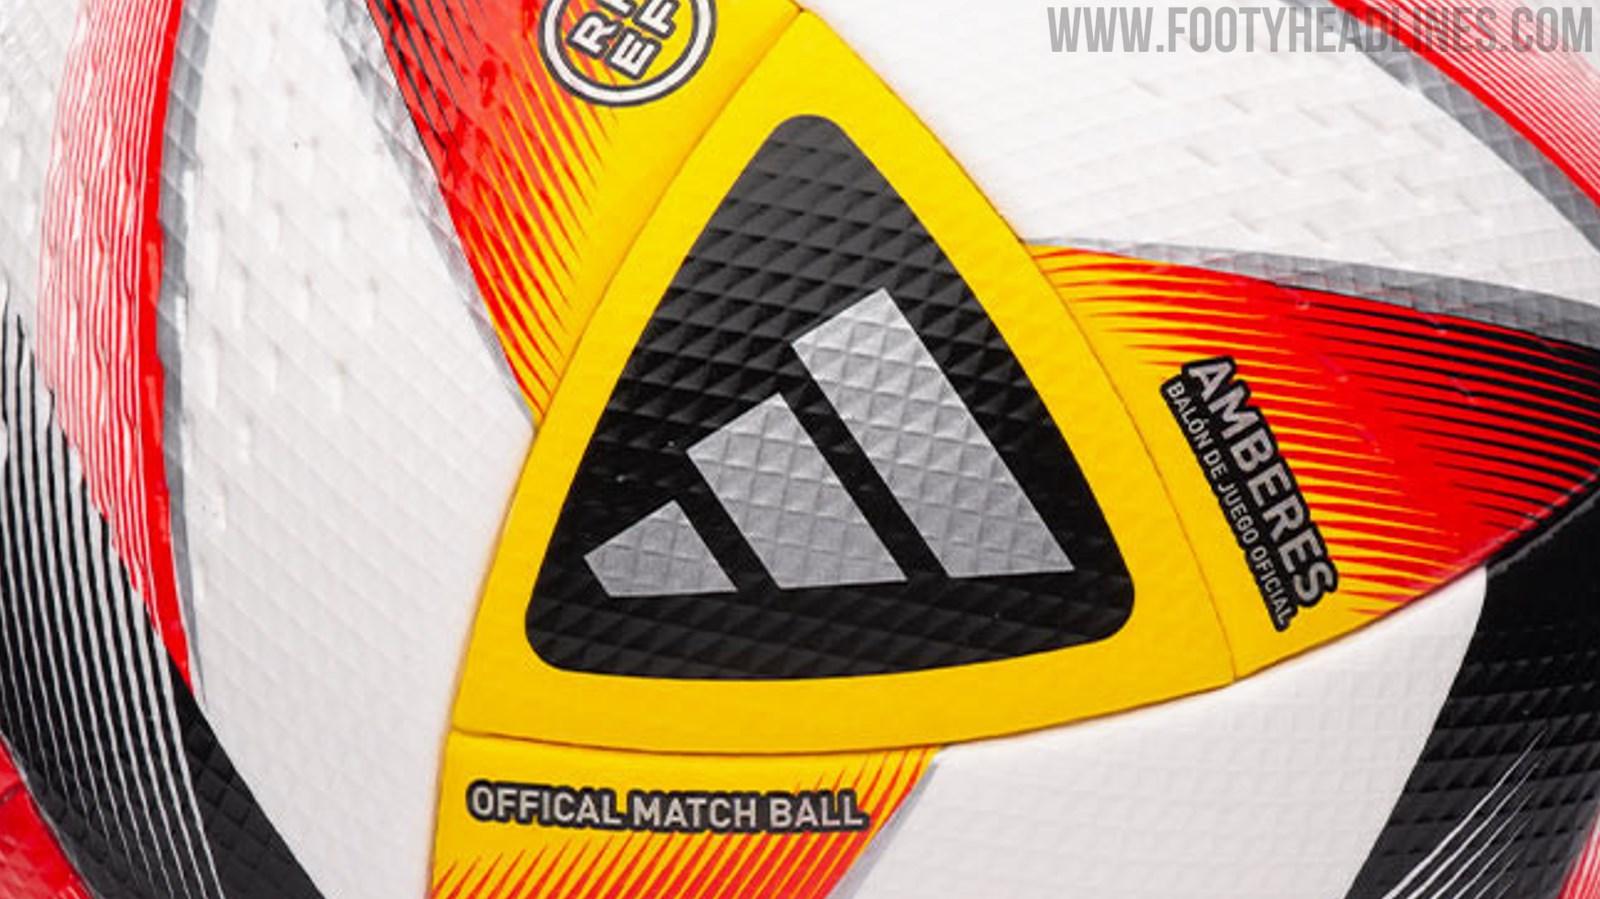 Adidas Copa Del Rey Spanish Super Cup Ball Released